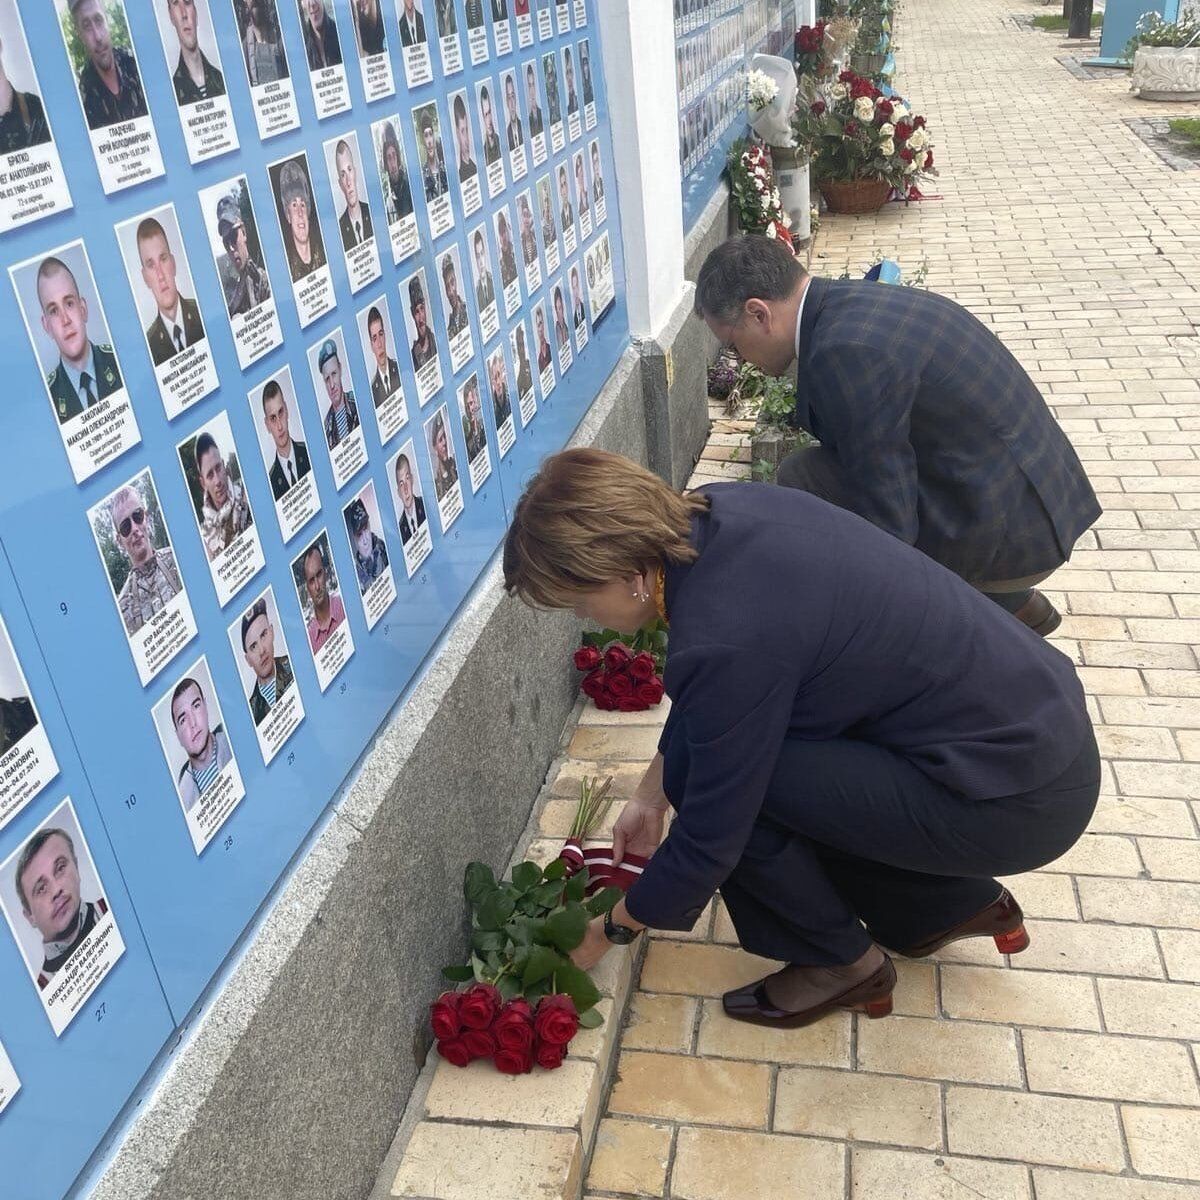 The new head of the Latvian Foreign Ministry arrived in Kyiv on a visit and paid tribute to those killed in the war with Russia. Photo